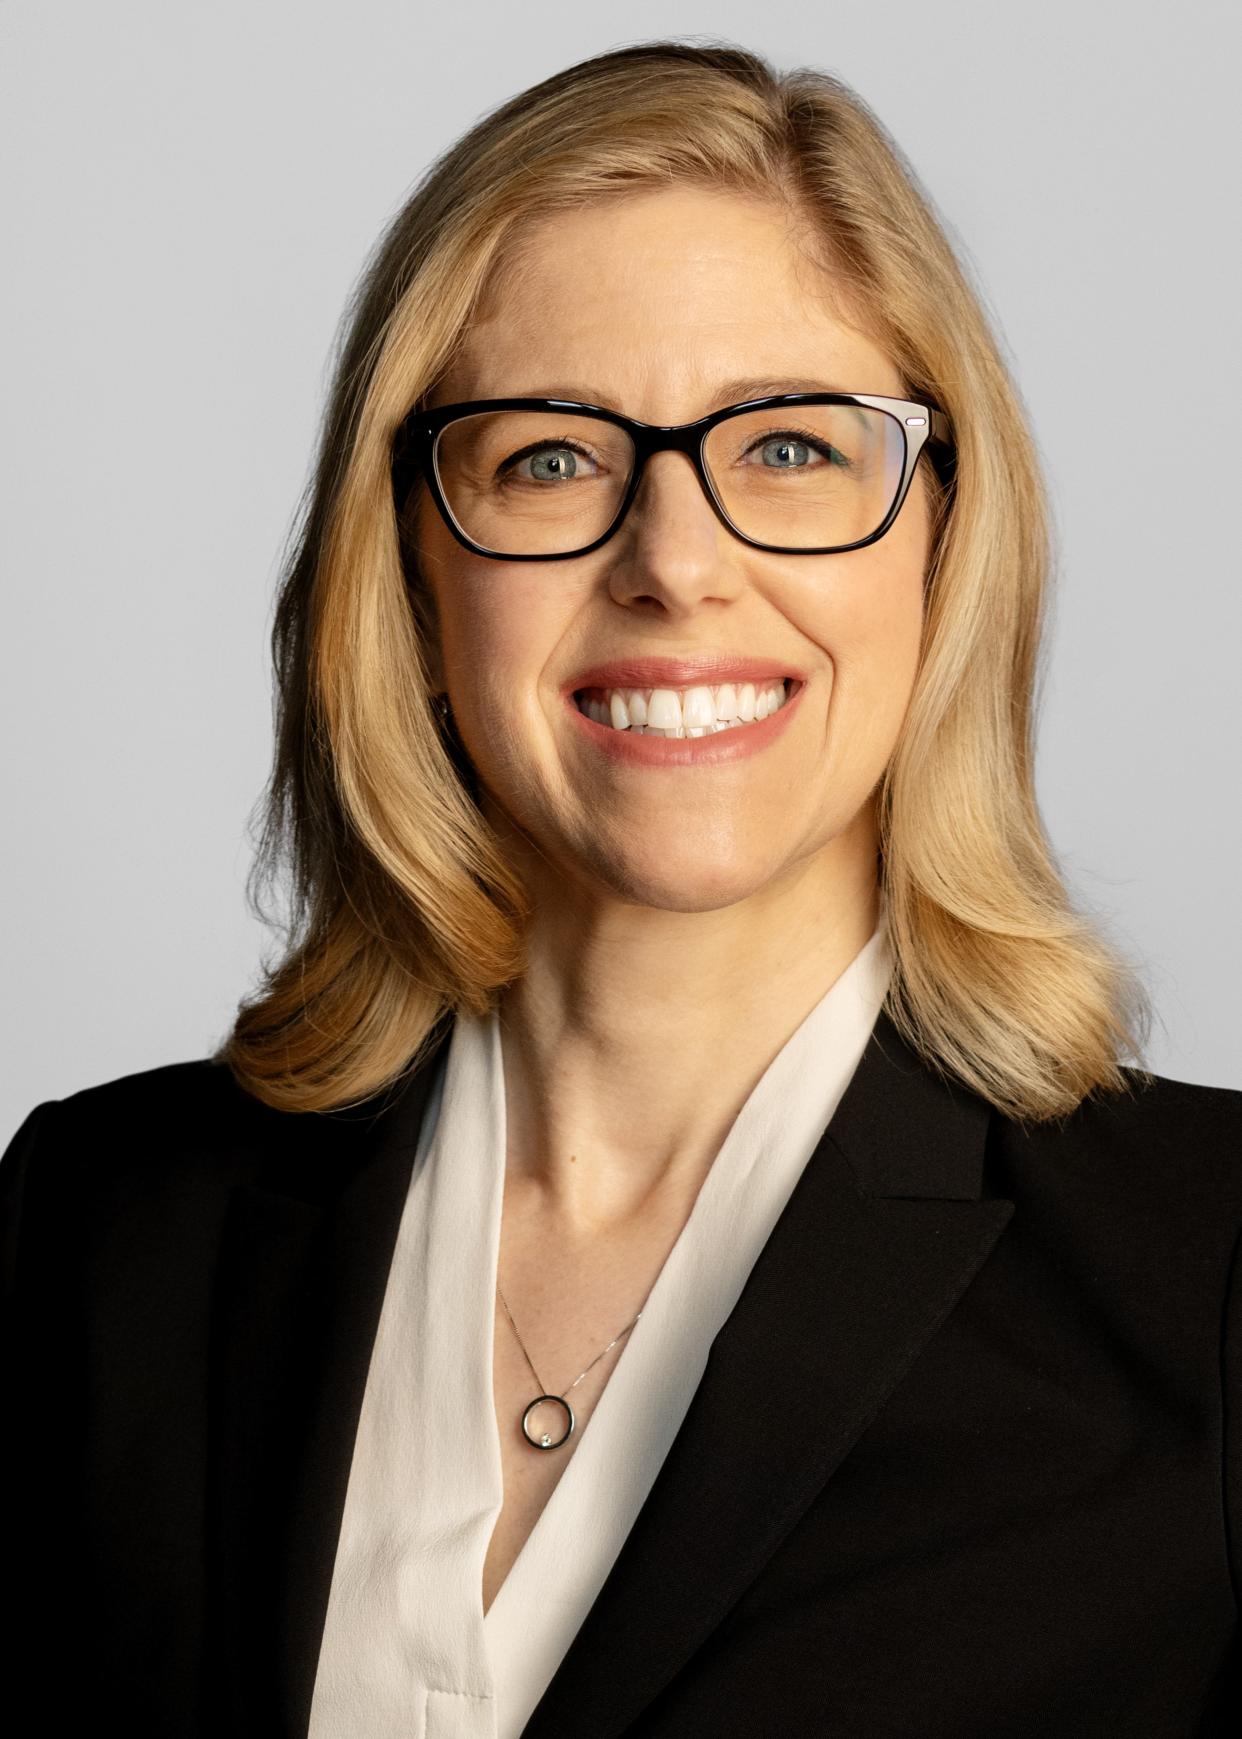 Sherry House, a former chief financial officer at Lucid Motors, began her career as an engineer at General Motors. She starts at Ford Motor Co. as the vice president of finance on June 3, 2024. She is expected to be promoted to CFO at Ford in early 2025.